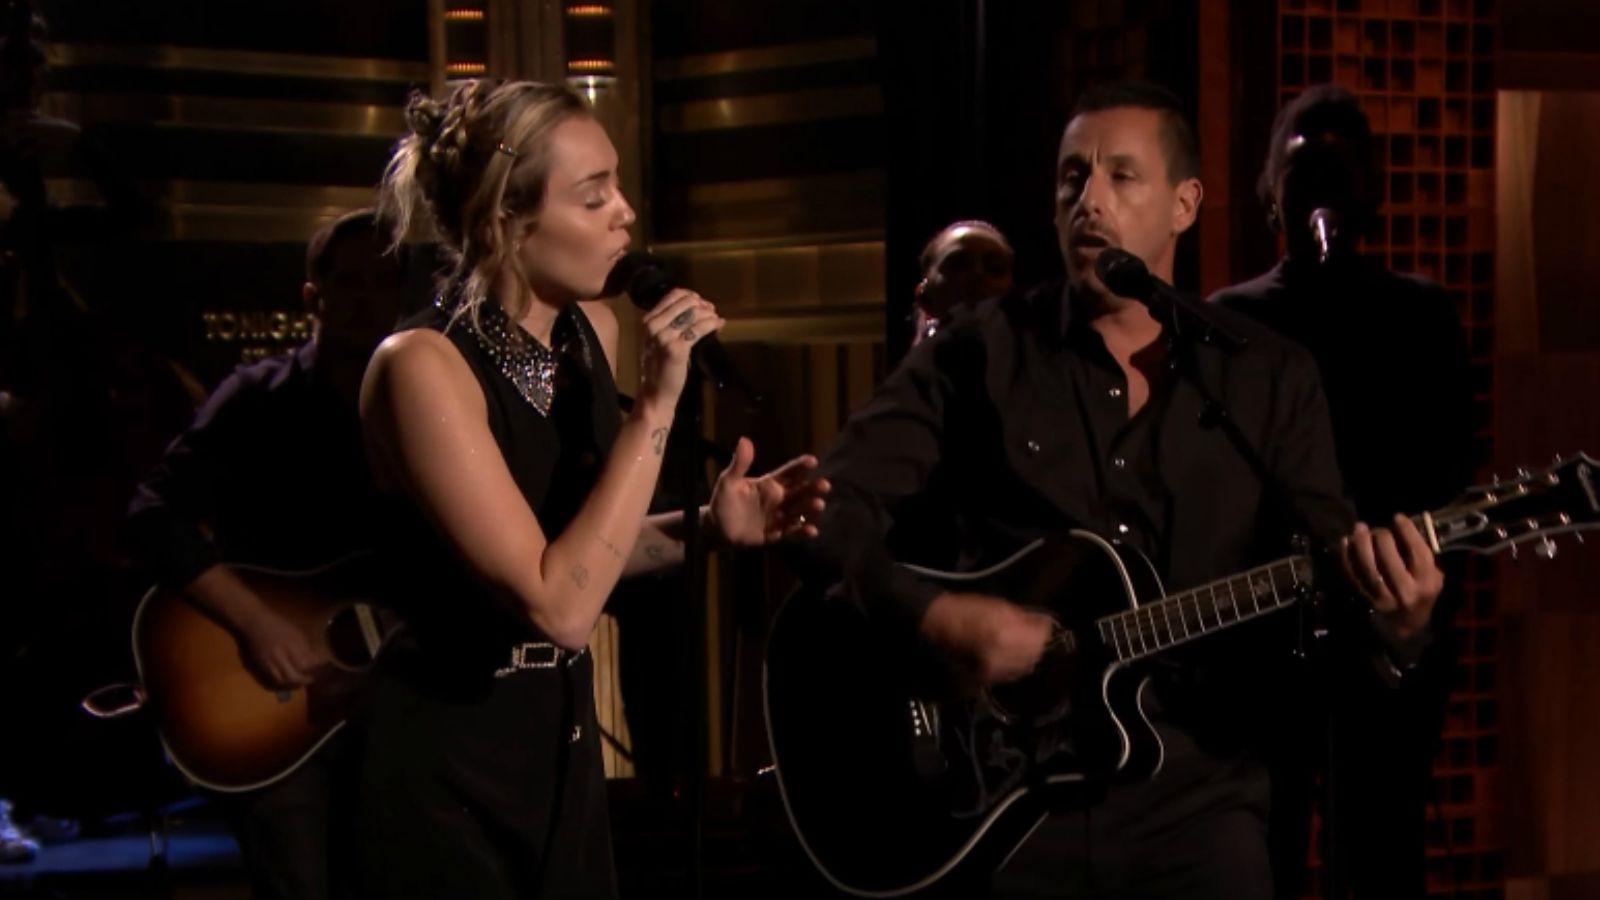 Miley Cyrus and Adam Sandler's Moving Performance of "No Freedom."